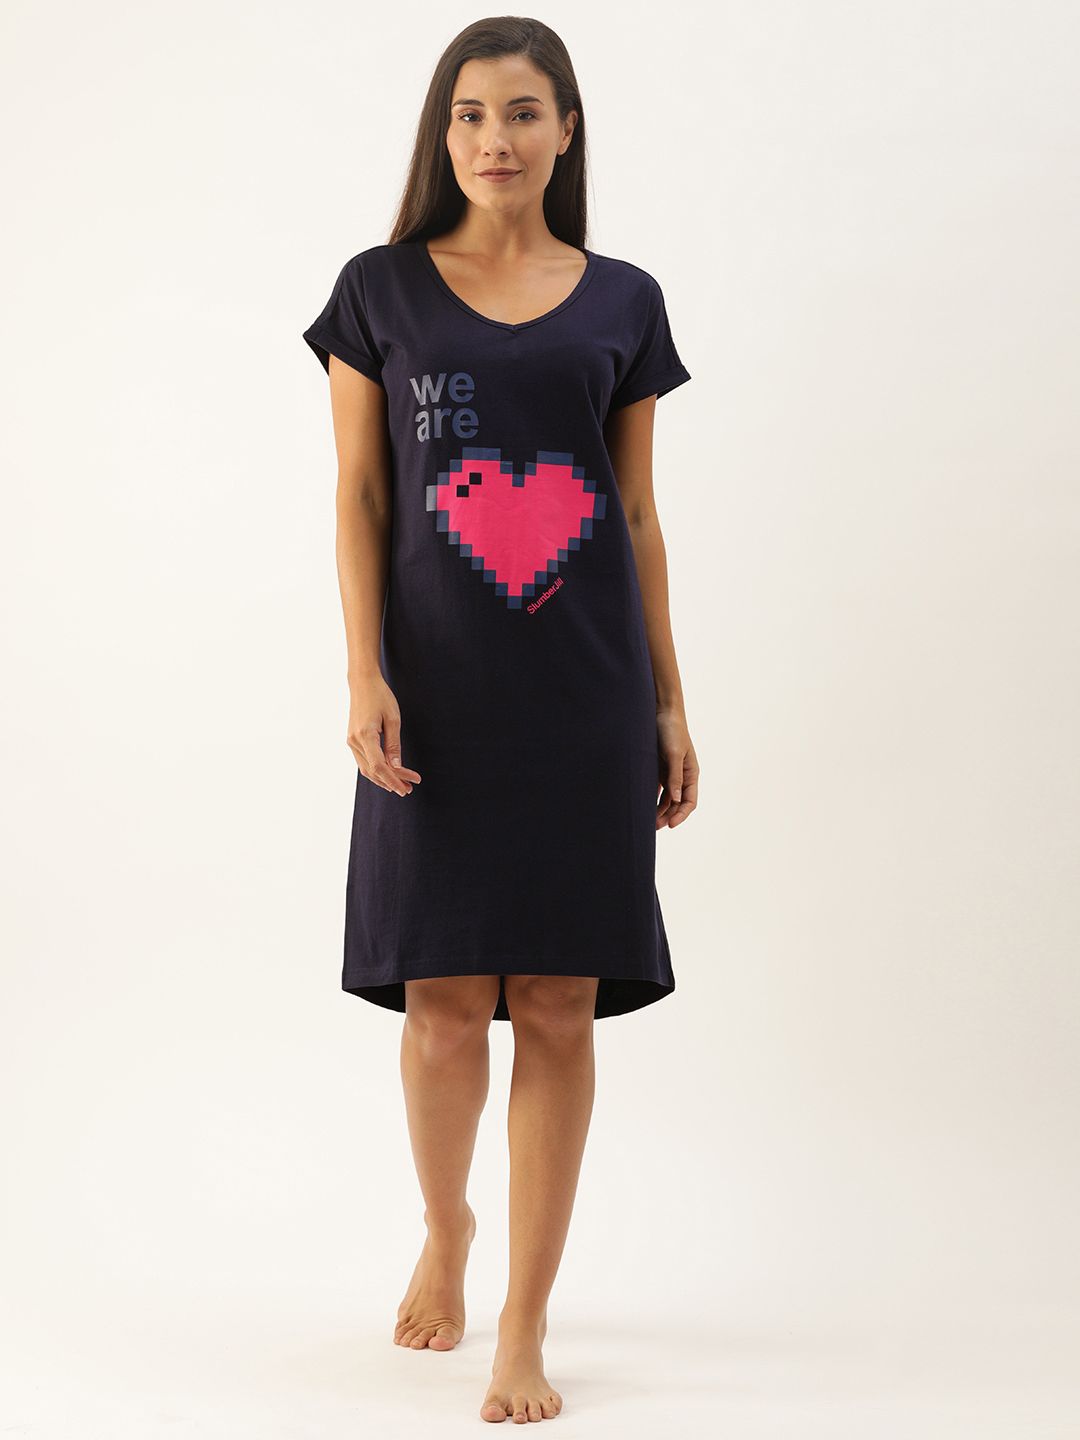 Loose Fit "We are Heart" Sleep Shirt - Colour Navy